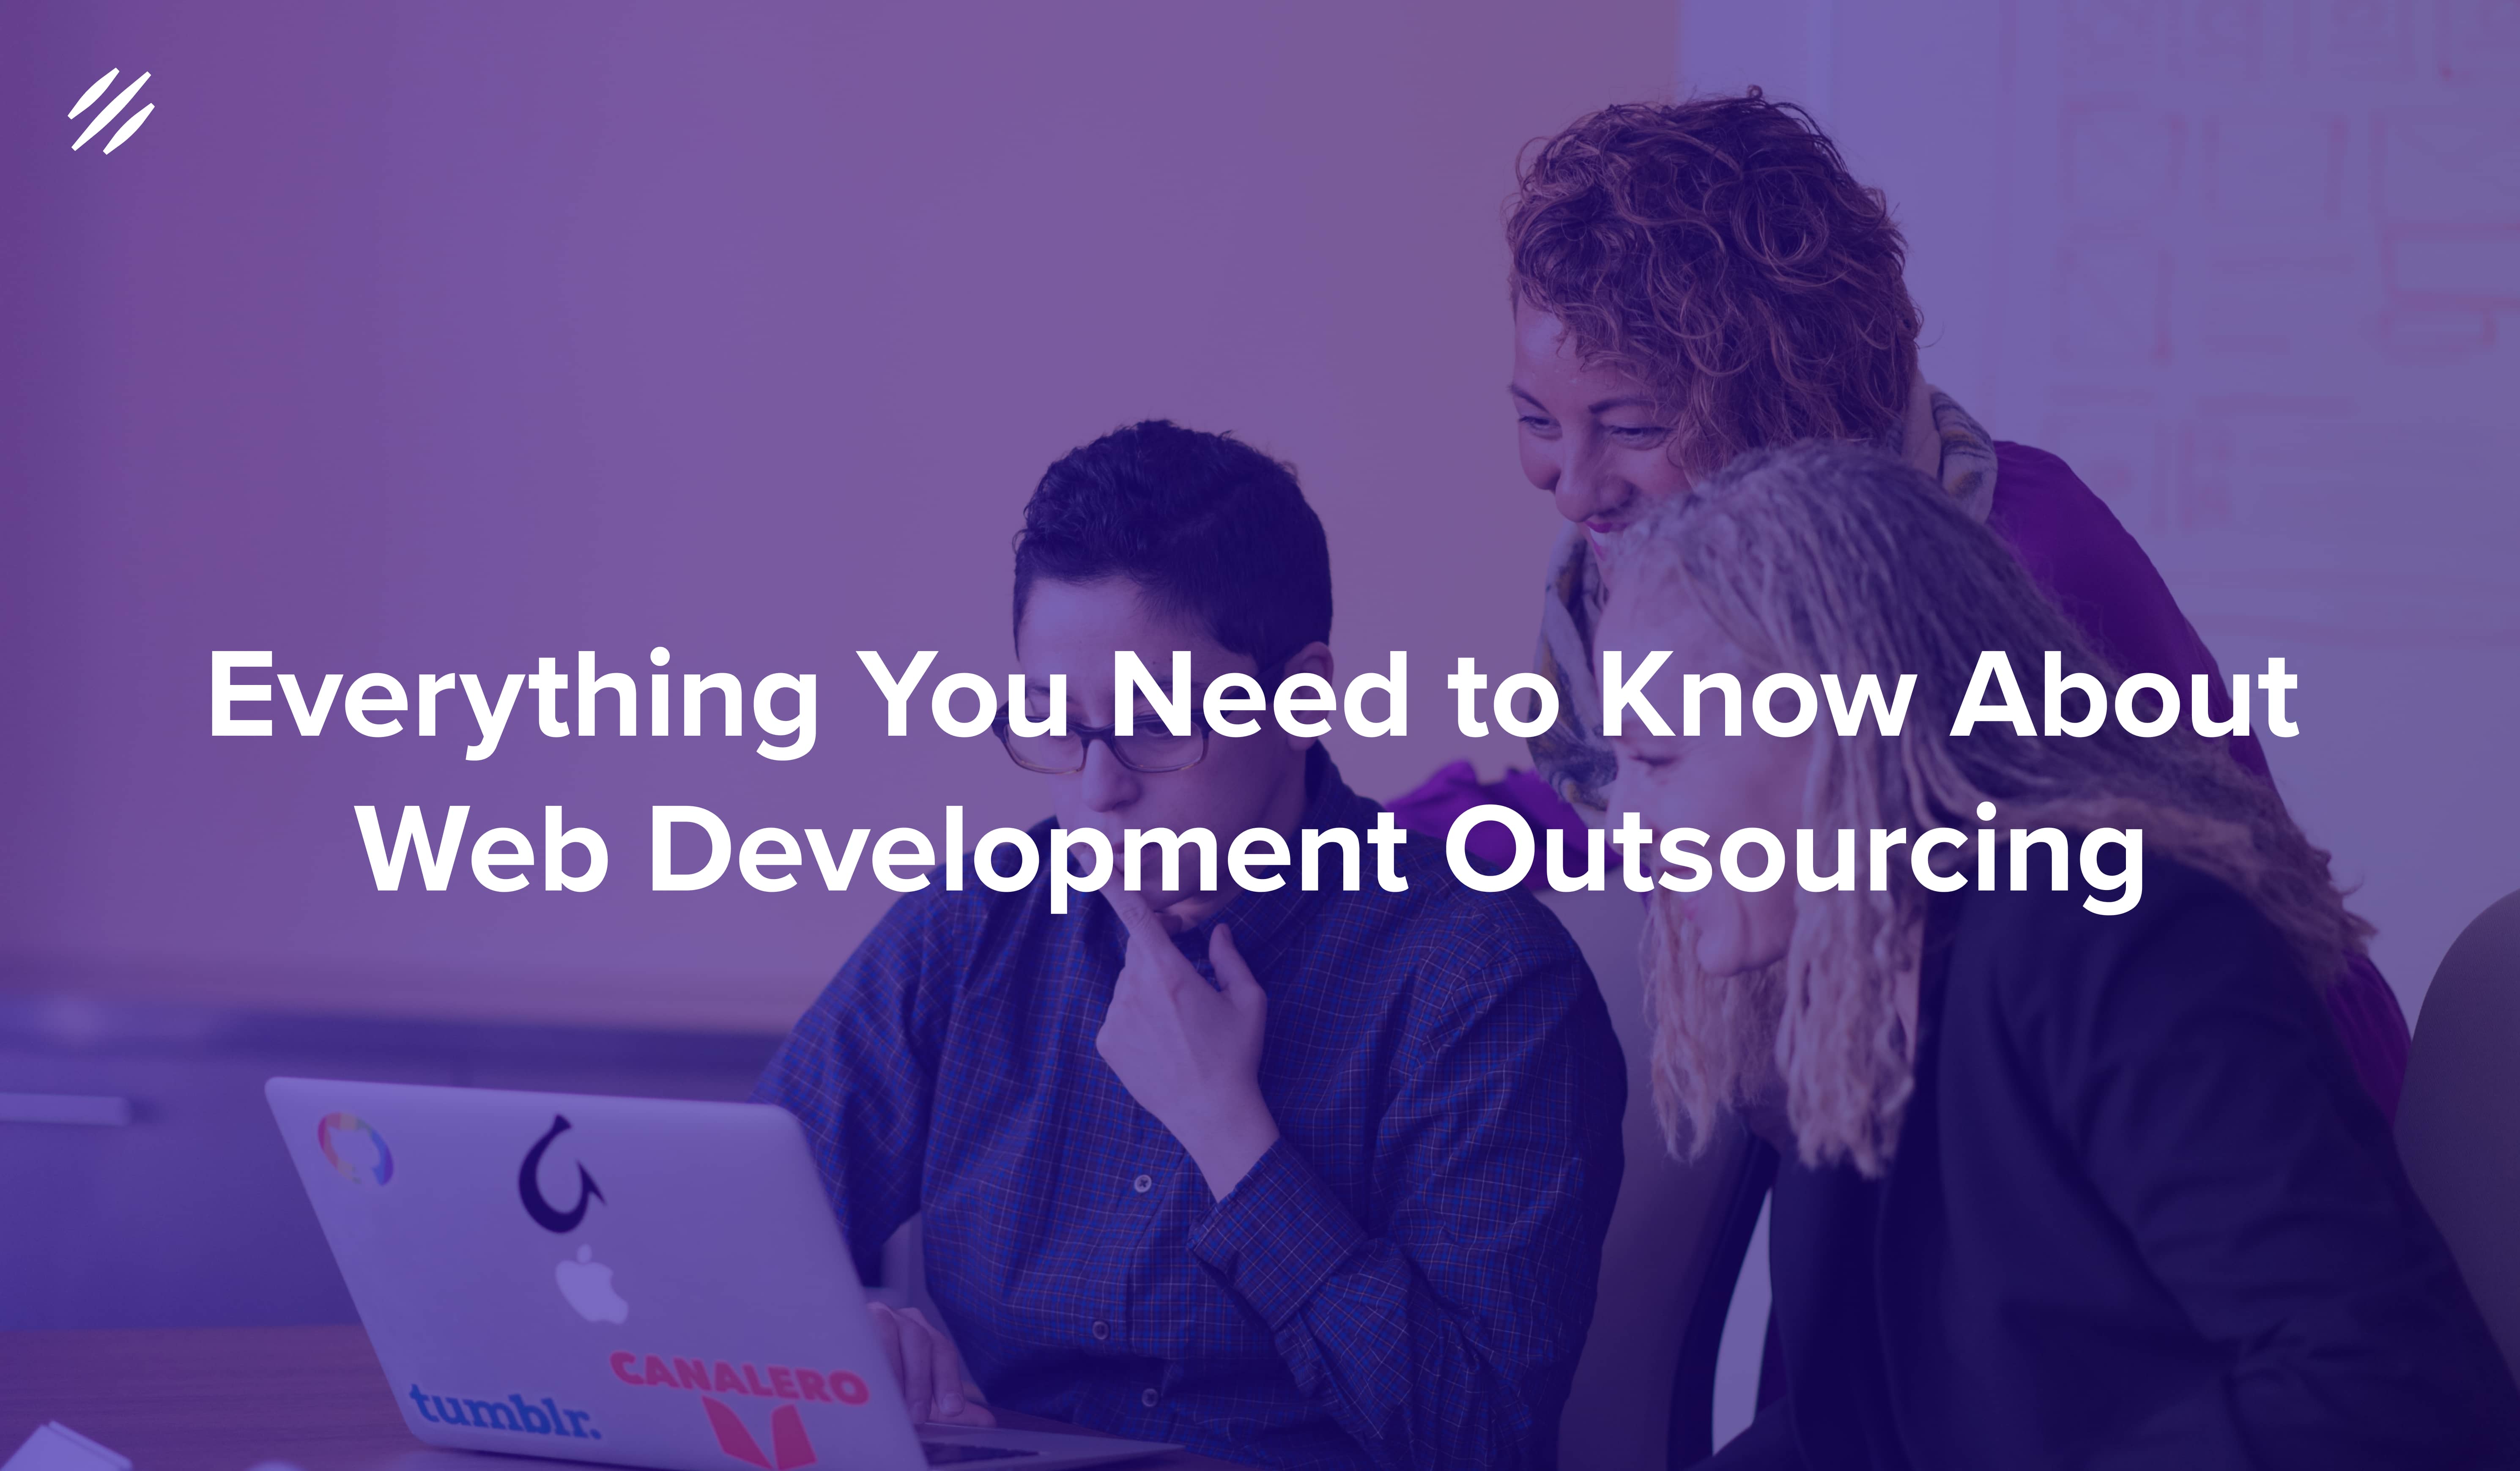 Everything You Need to Know About Web Development Outsourcing